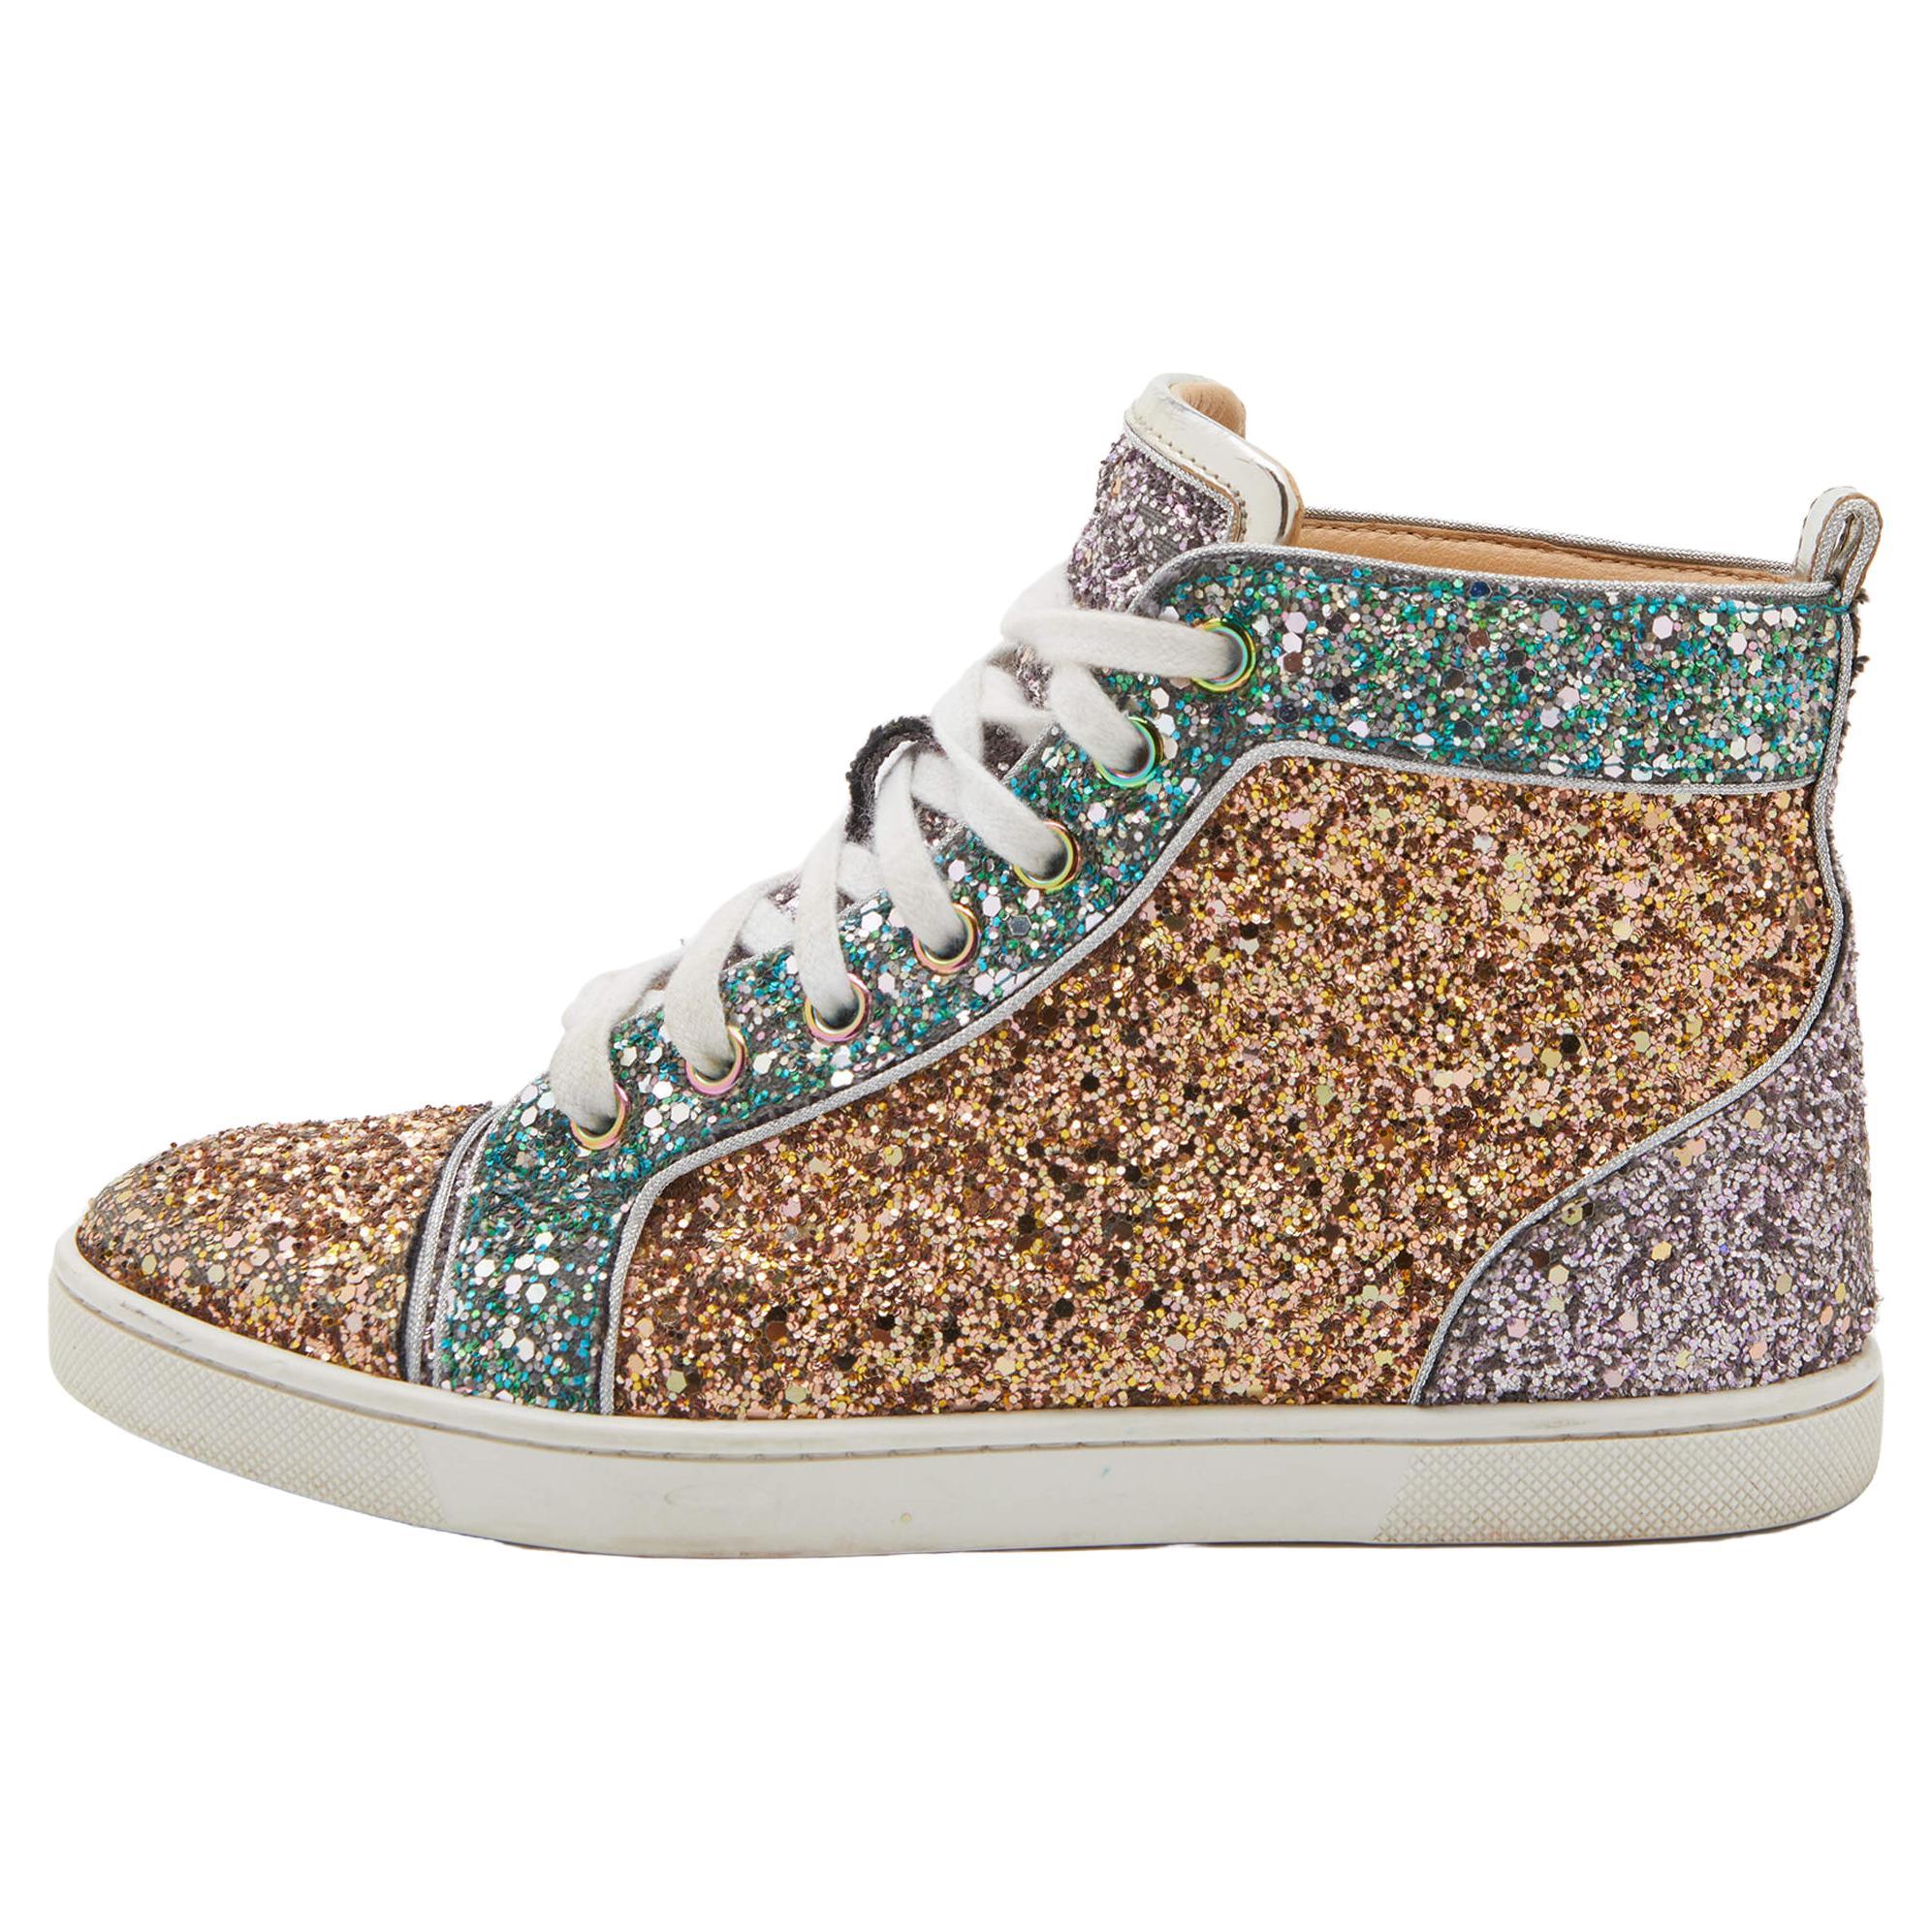 Christian Louboutin Glitter Fabric Bip Bip High Top Sneakers Size 35.5 For Sale